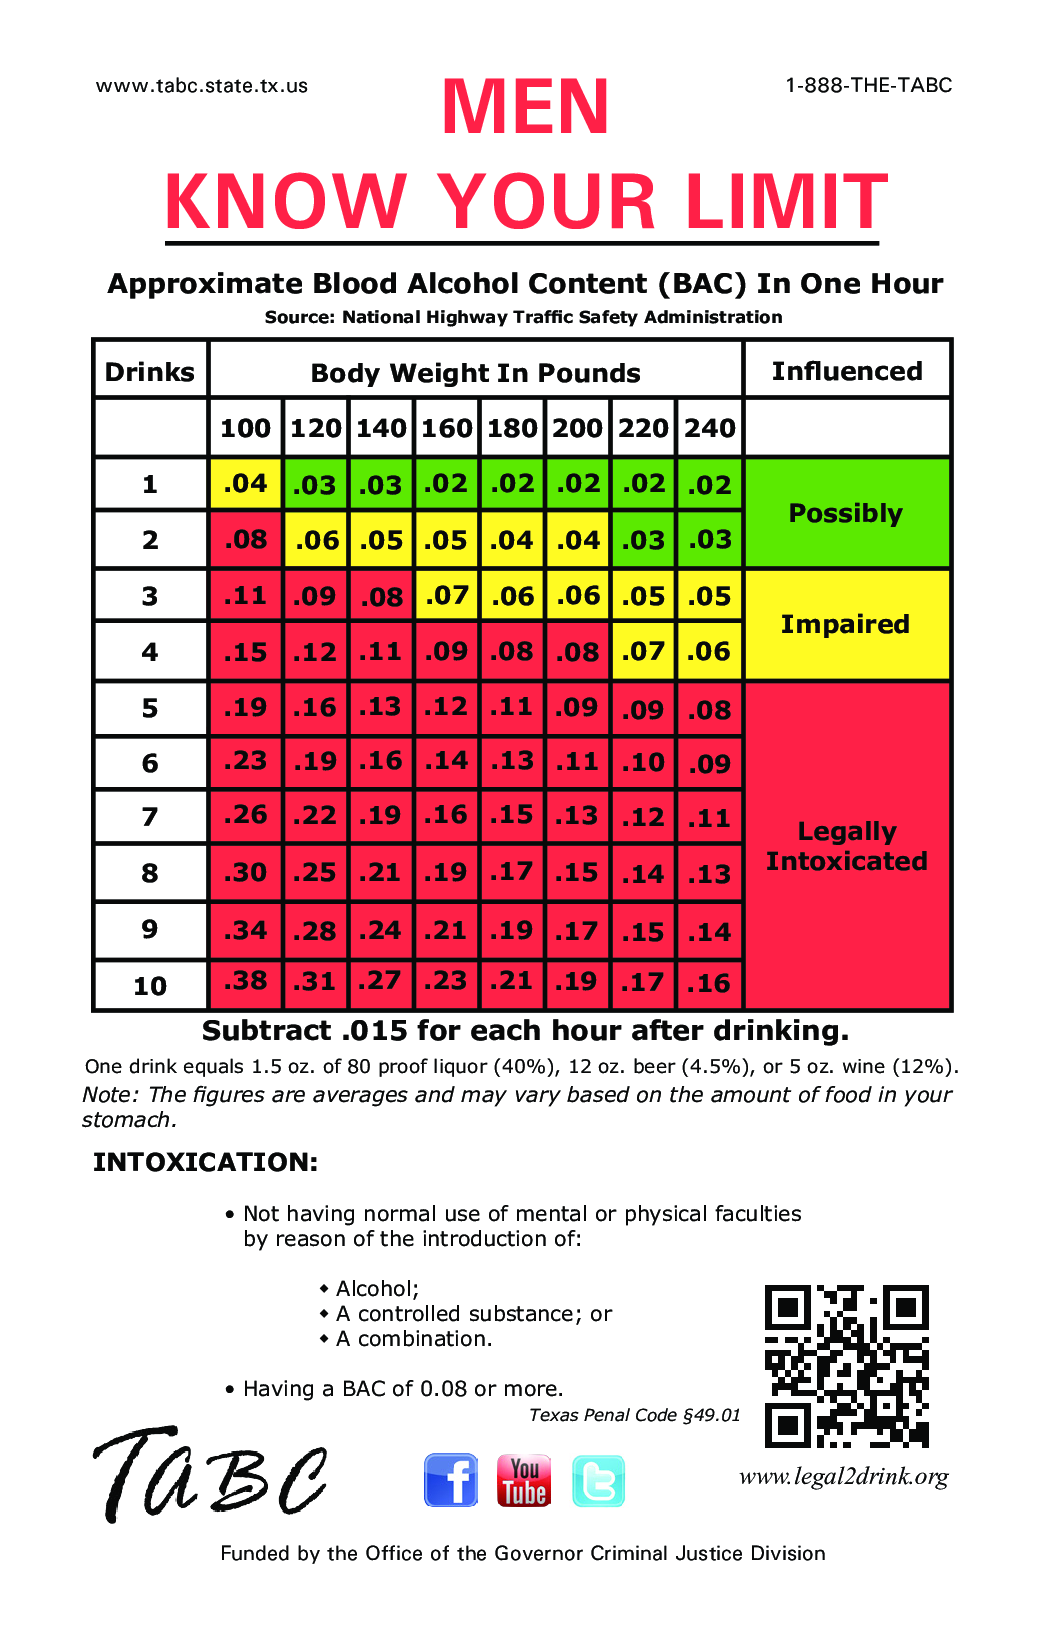 Blood Alcohol Content Chart main image